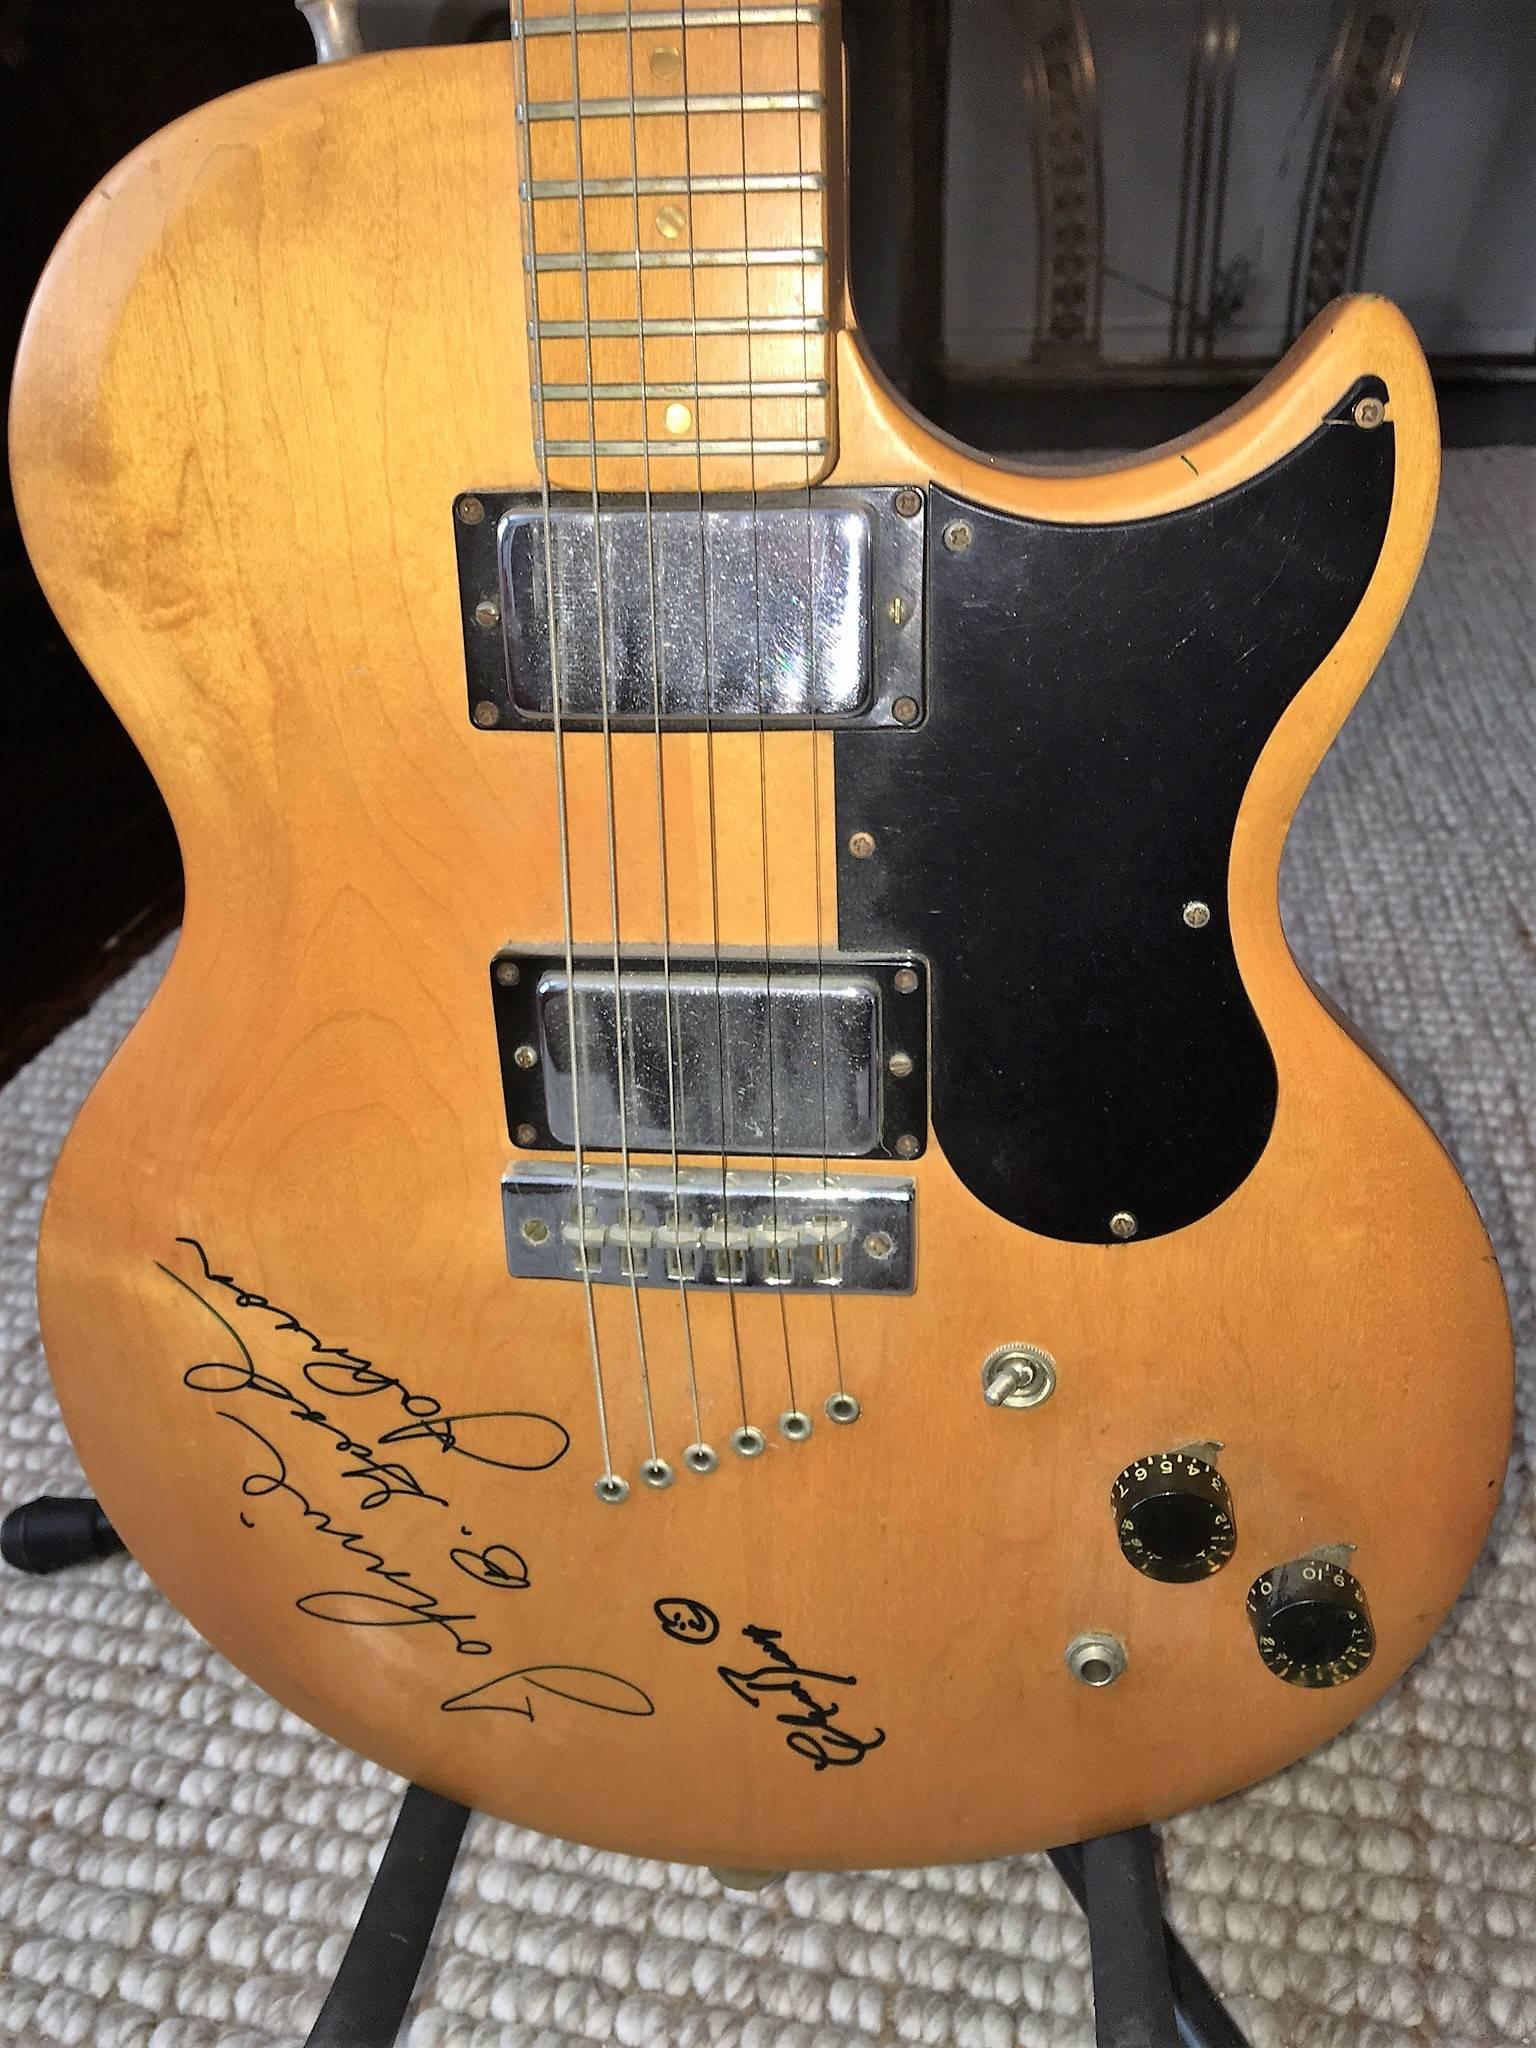 This Circa 1967 Gibson guitar is hand signed by guitar legend Chuck Berry who also created a Smiley face. Johnny B.Good Johnson Chuck Berry's Piano Player also autographed this guitar. All these autographs were obtained in person in 1994 by the